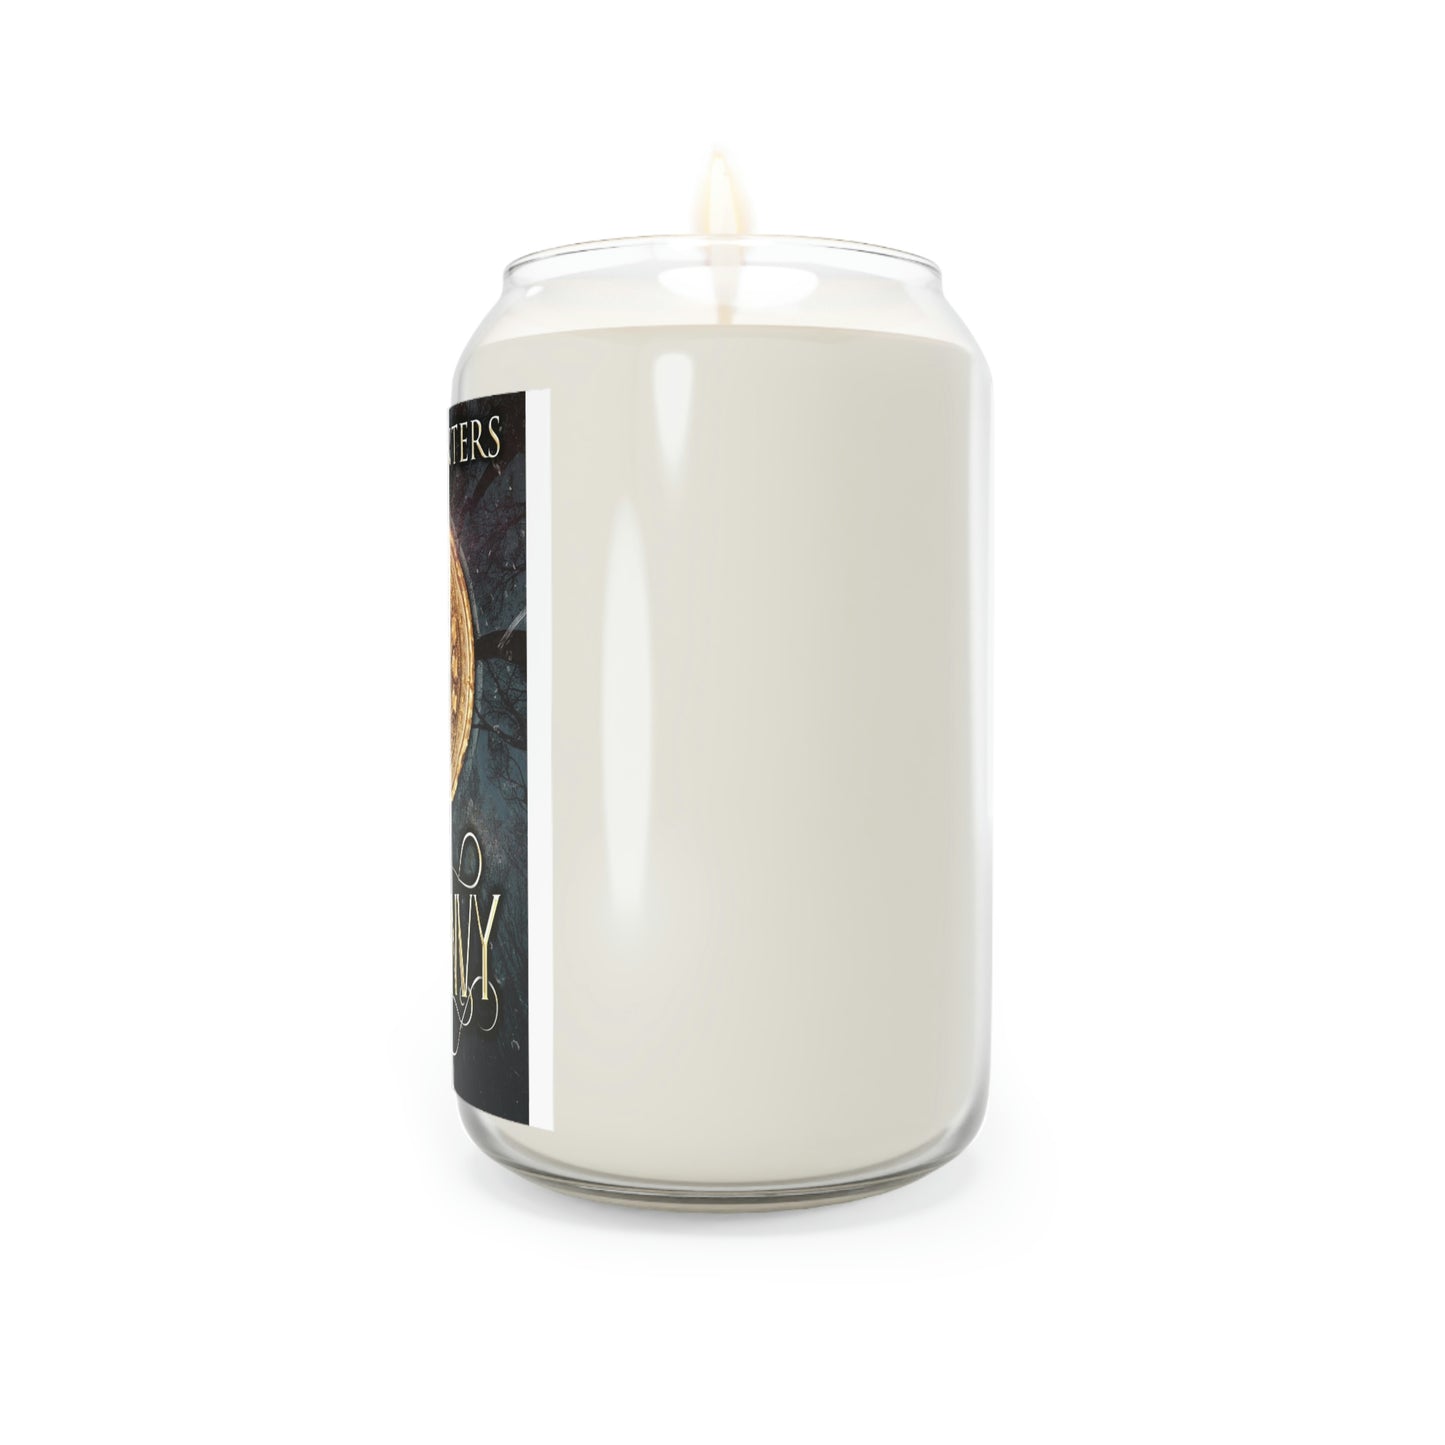 Gold Envy - Scented Candle